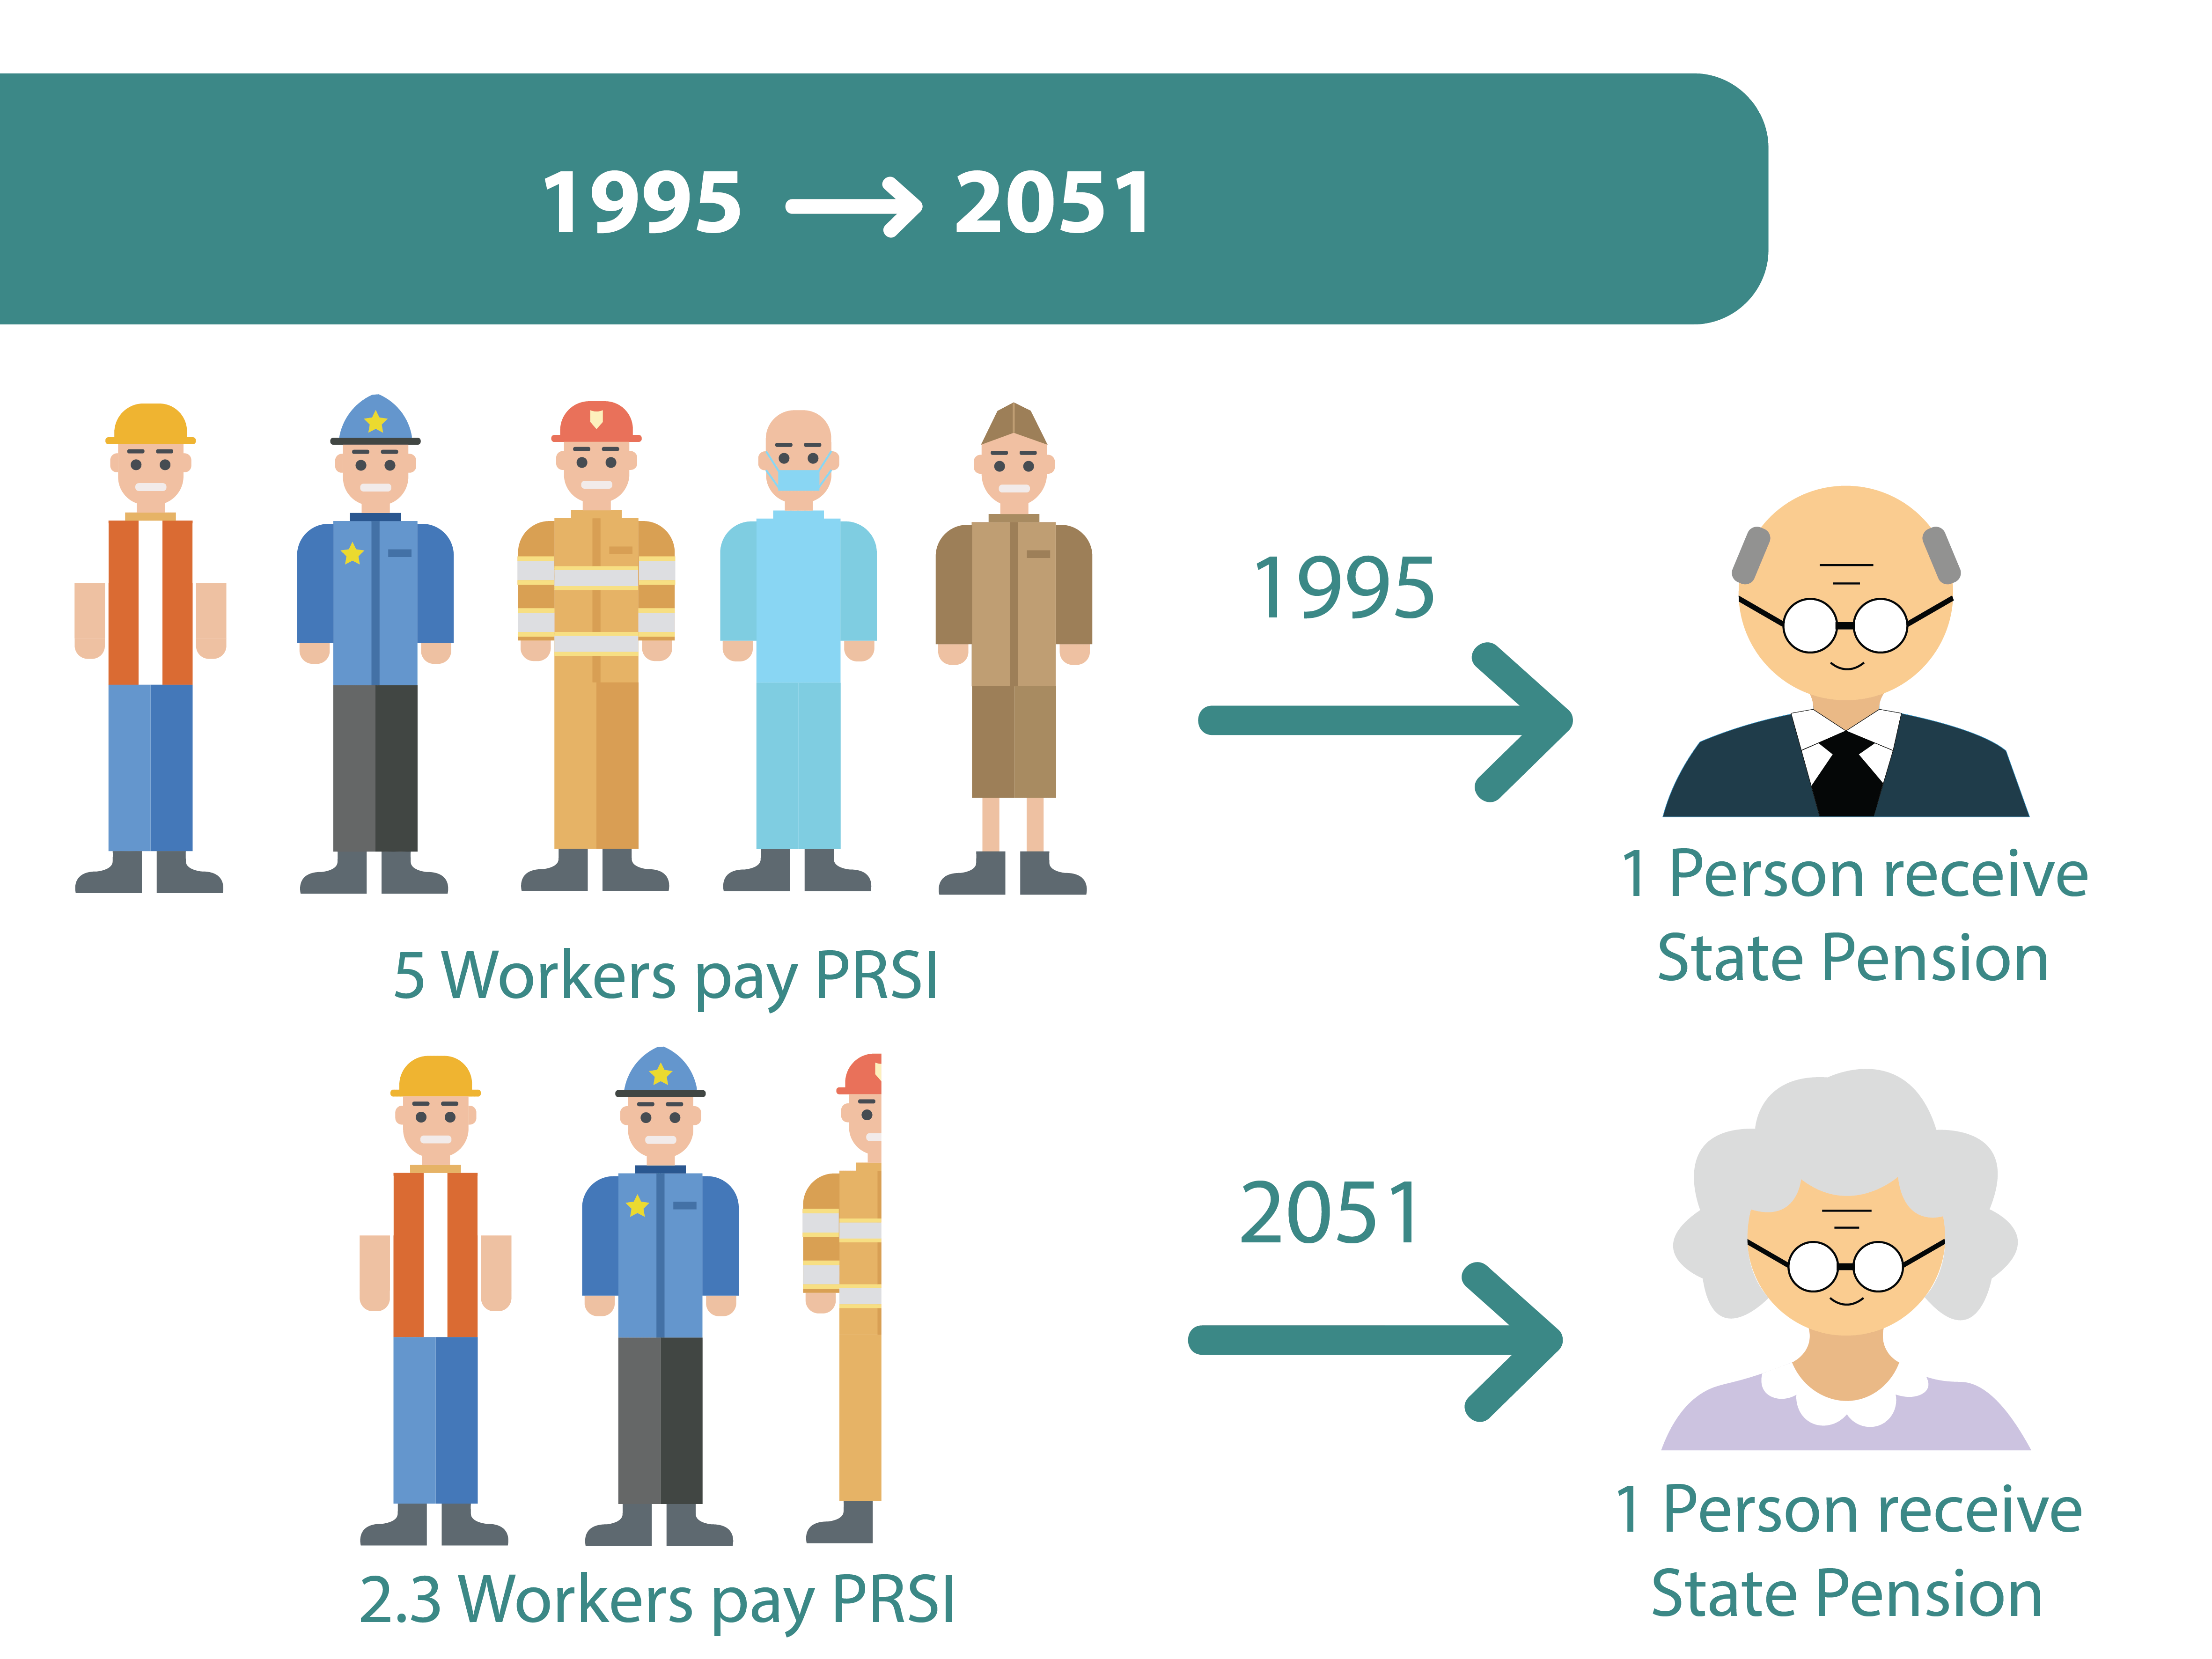 Difference between 1995 and 2051